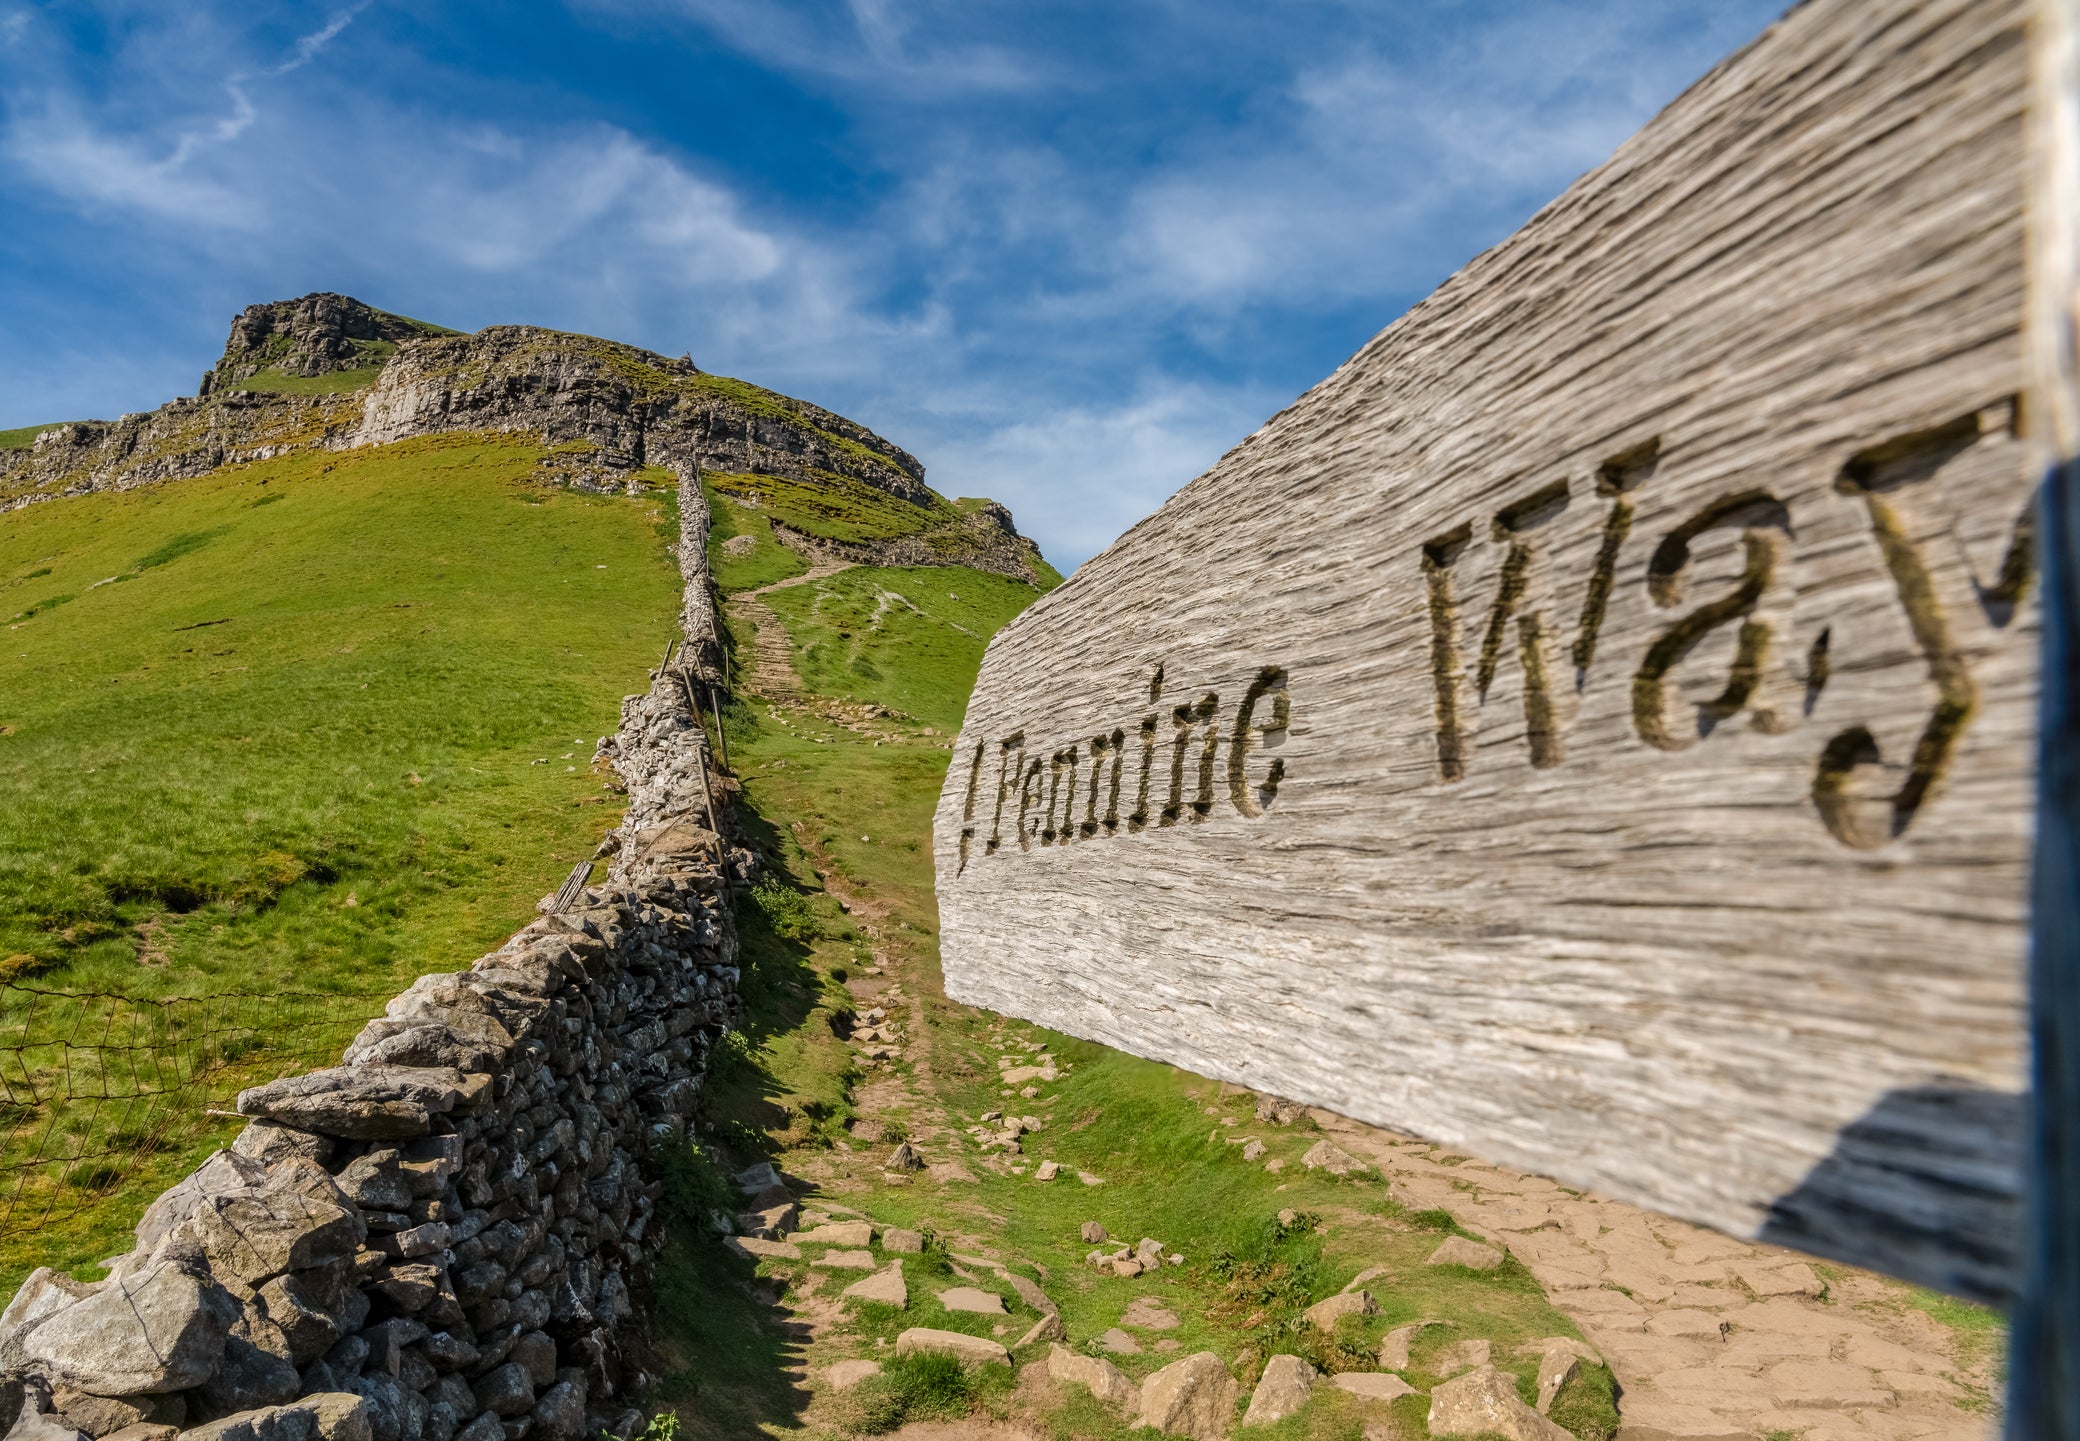 The Pennine Way spans 268 miles from Derbyshire to Kirk Yetholm, Scottish Borders